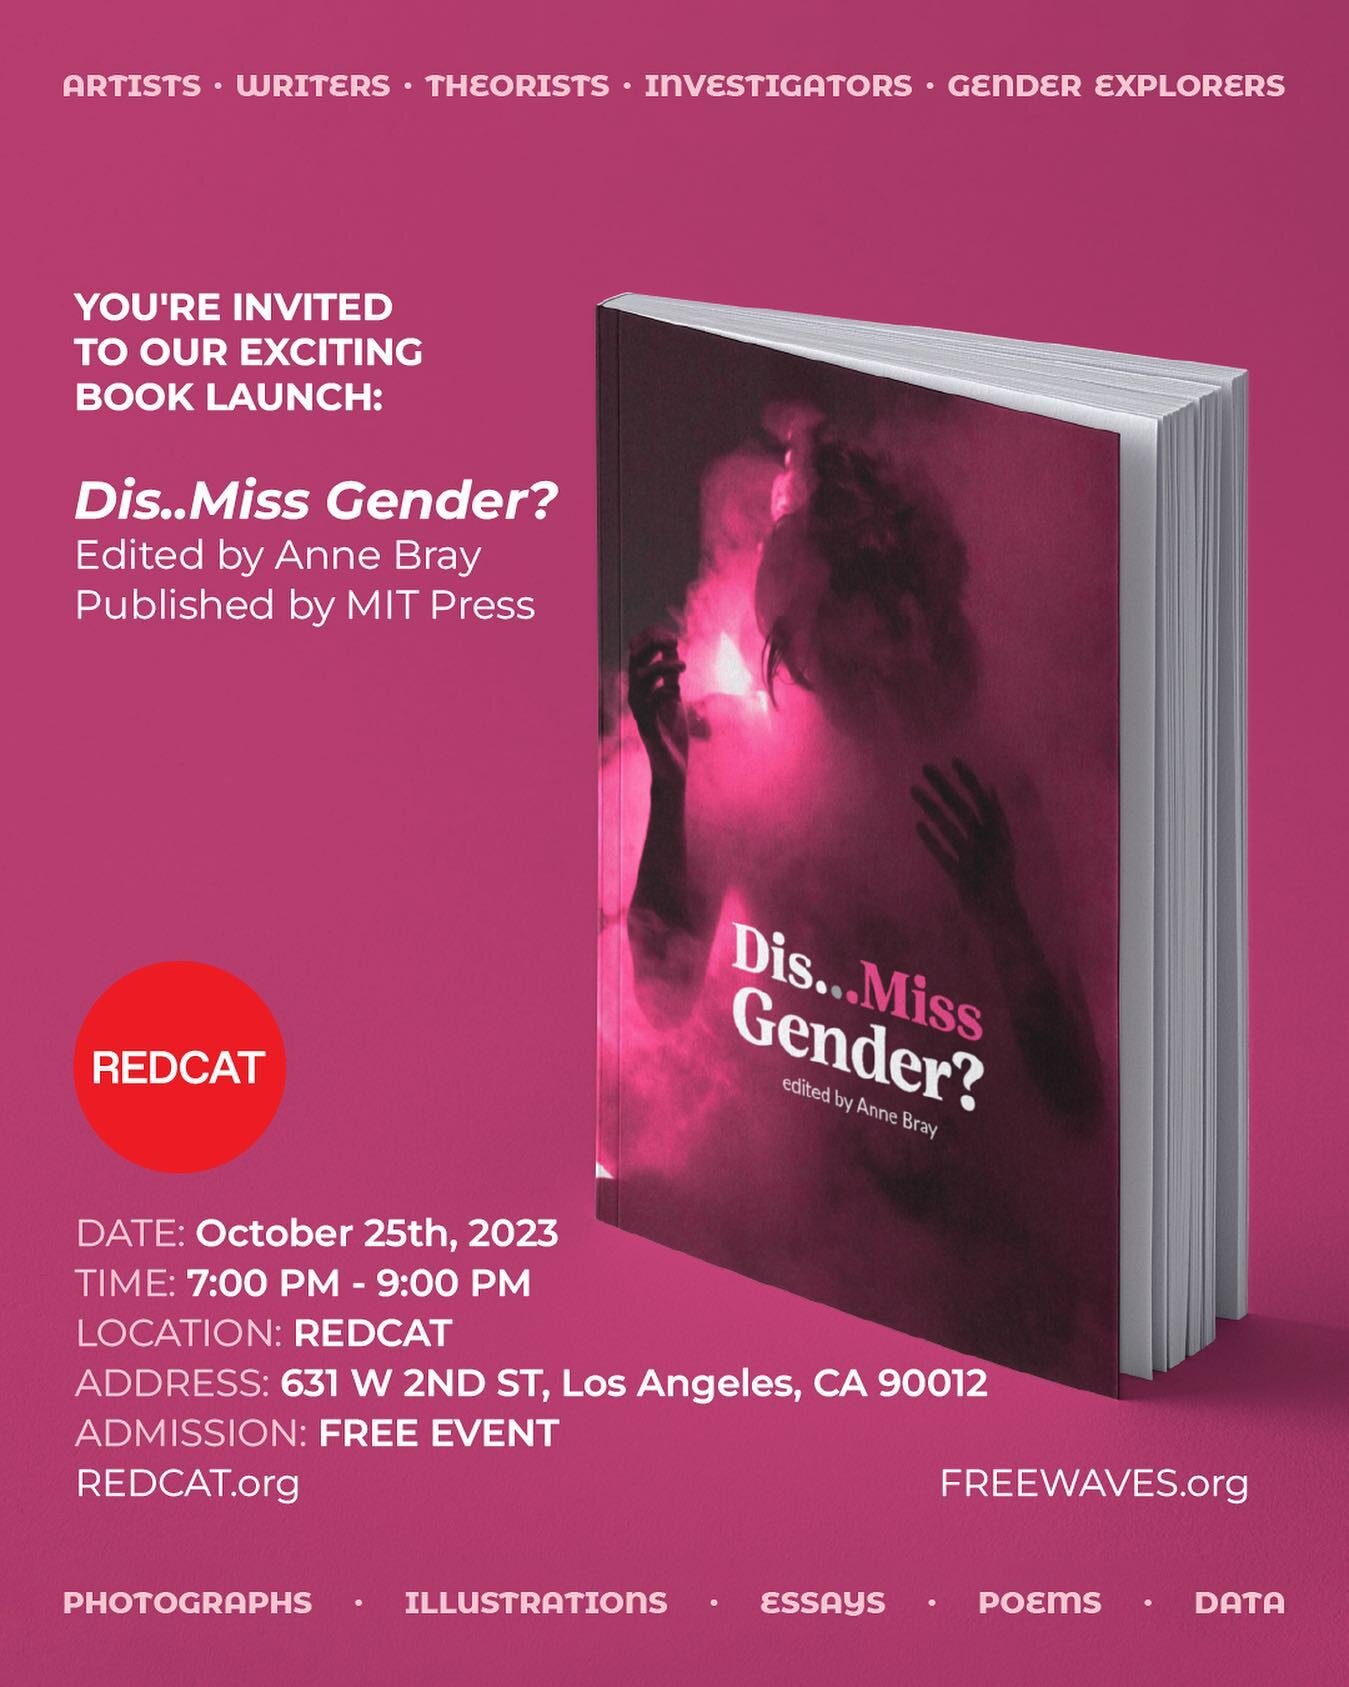 💖Save the date!

LA Freewaves is launching &ldquo;Dis&hellip; Miss Gender?&rdquo; Edited by Anne Bray, published by MIT Press. 

 
🗓: Wednesday, October 25, 2023 | 7:00 pm - 9:00 pm
📍: REDCAT  631 W 2ND ST,LOS ANGELES, CA 90012
🎟️ : FREE | Regist